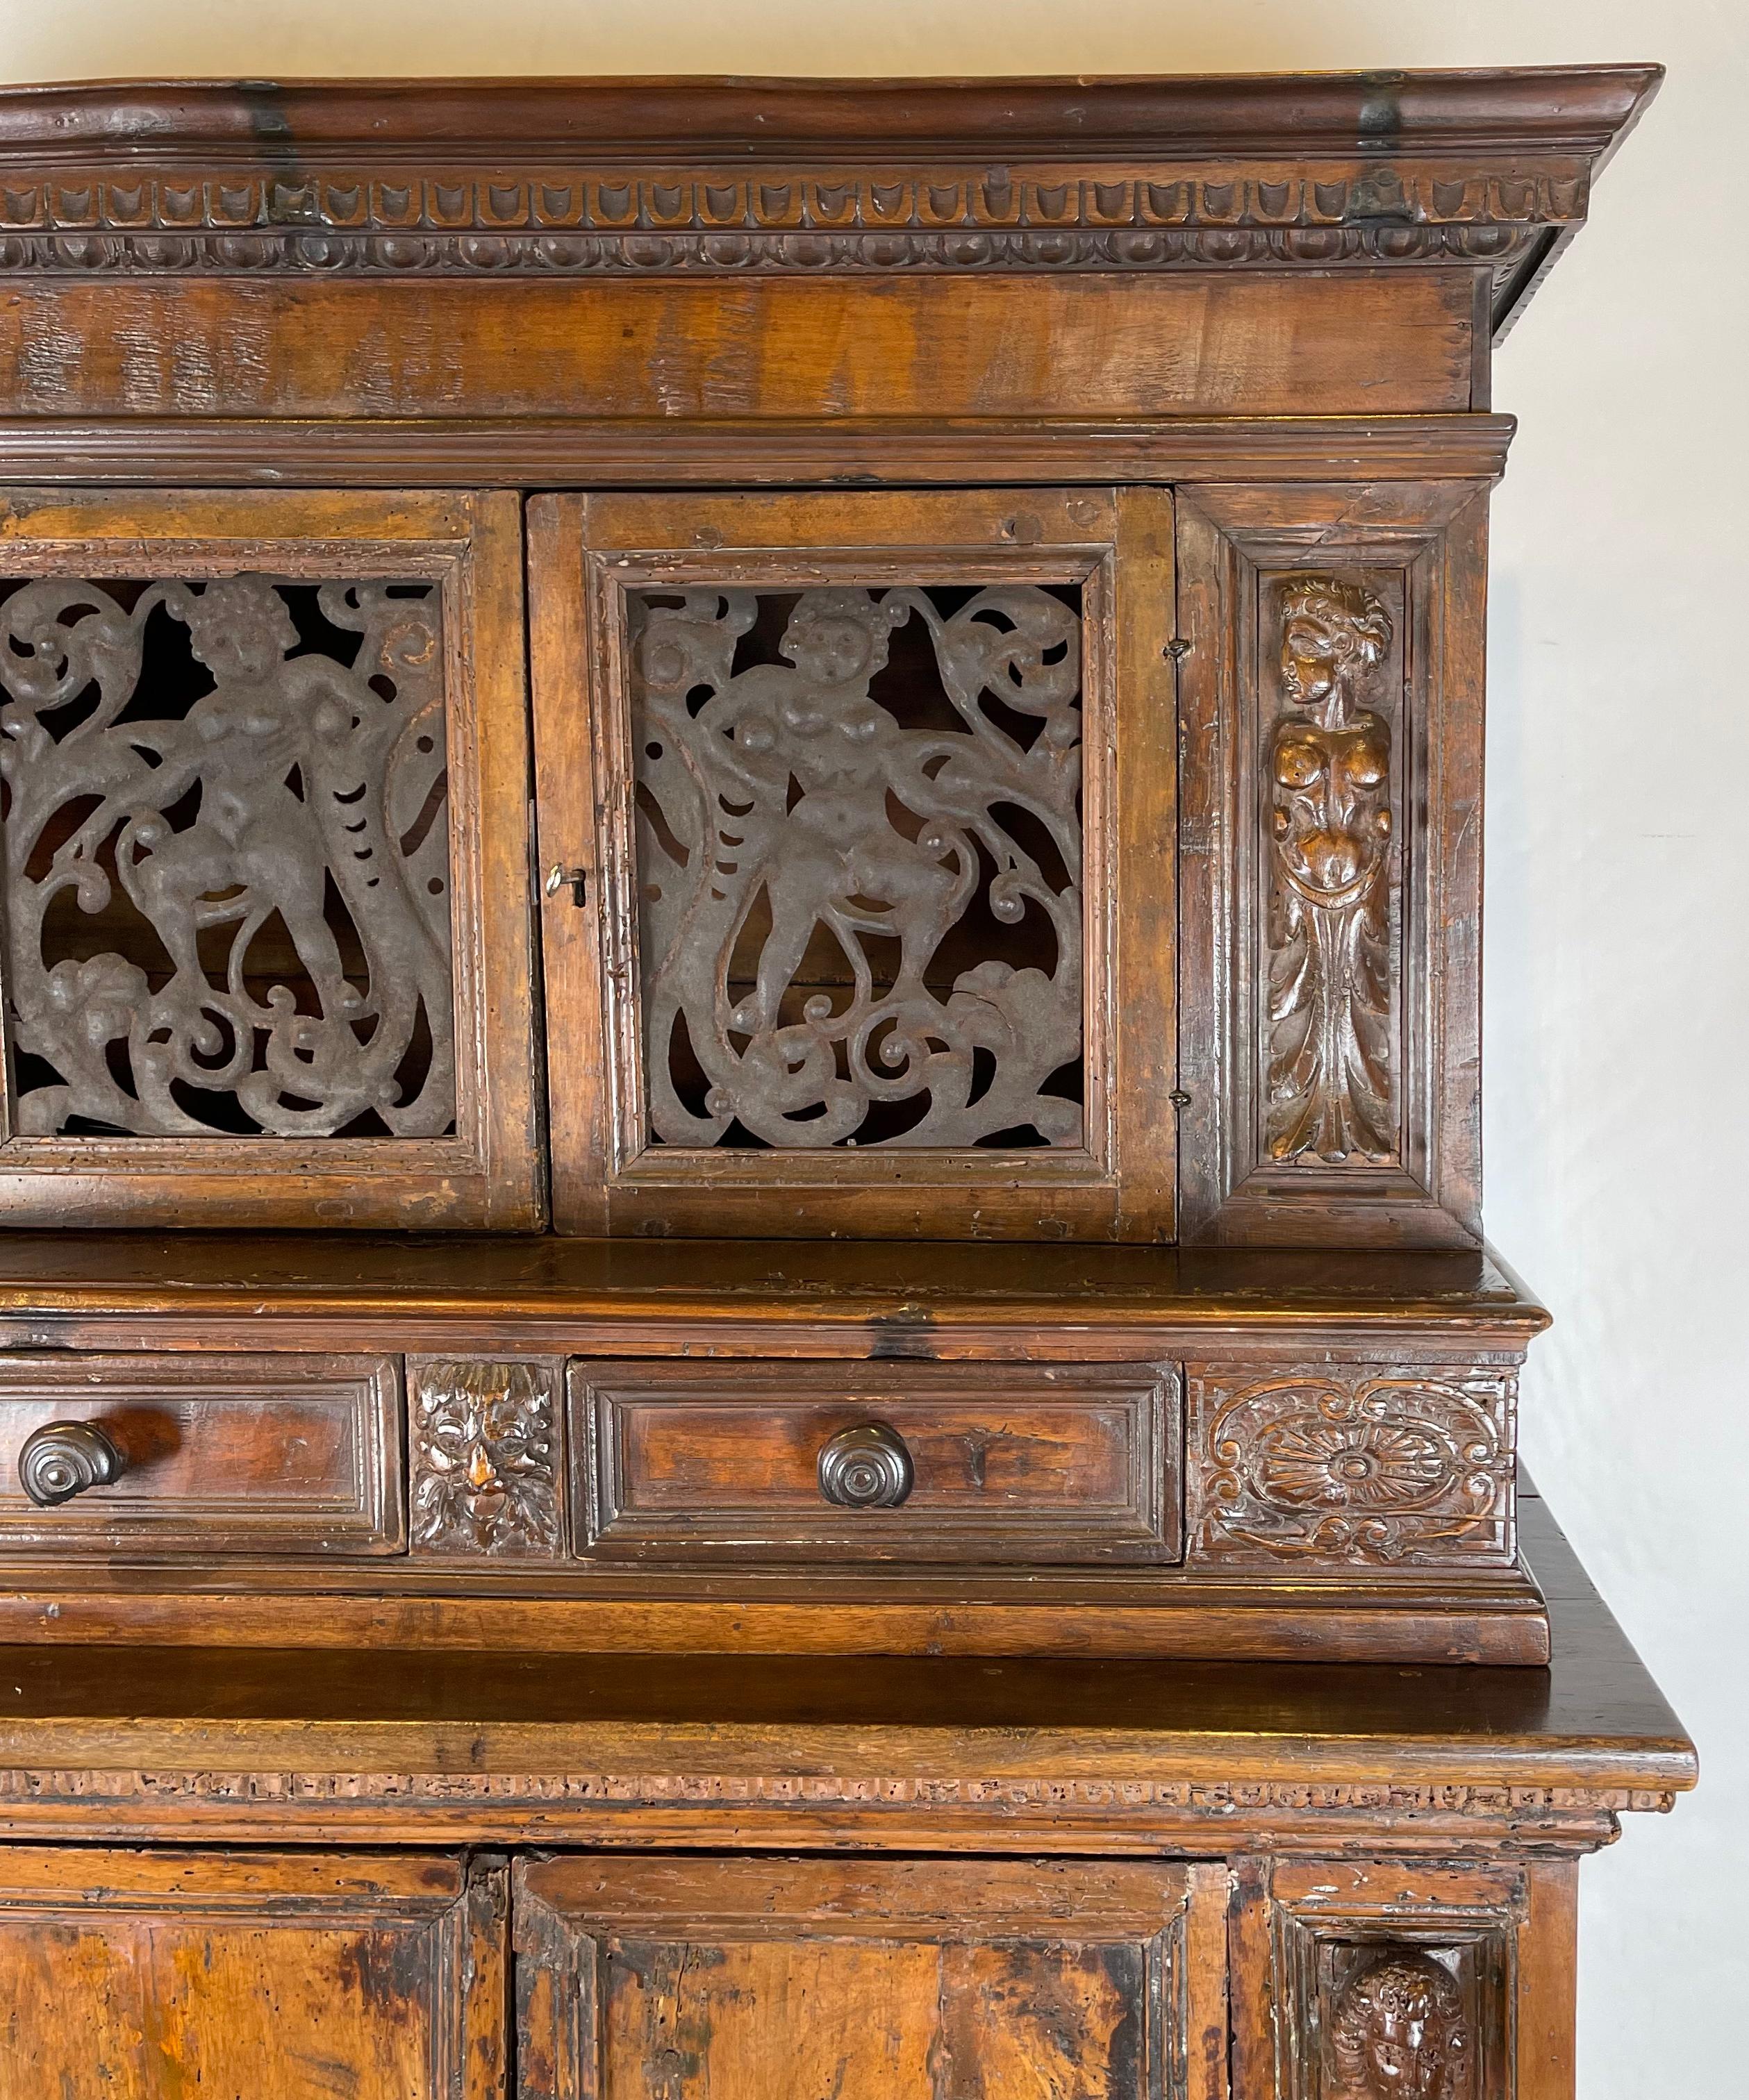 Hand-Crafted Late 17th Century Italian Step-Back Cabinet